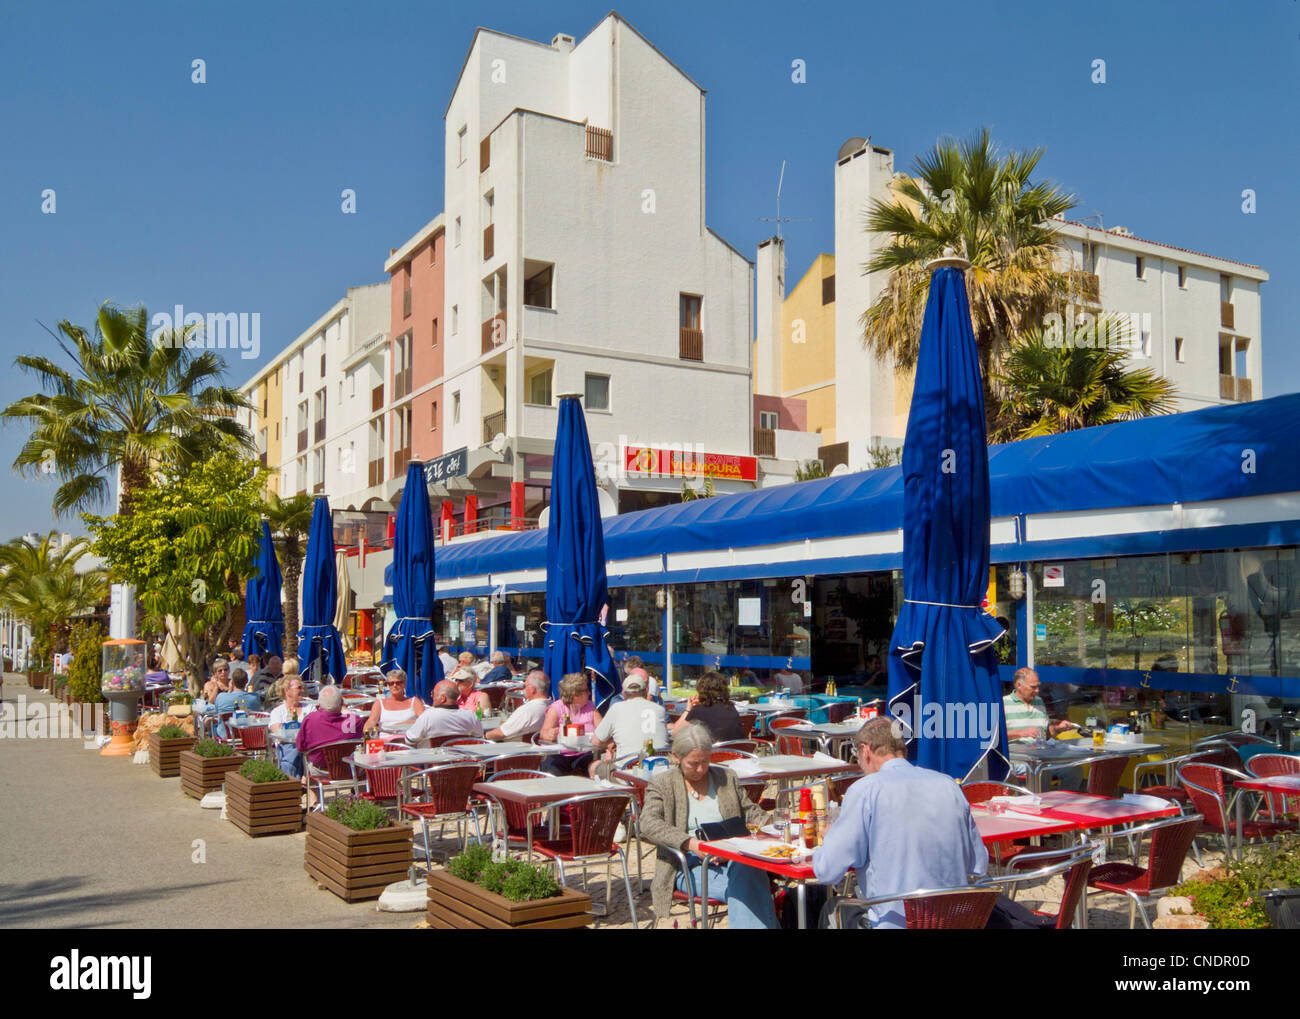 Diners in a cafe restaurant in the busy marina complex at Vilamoura Algarve Portugal EU Europe Stock Photo